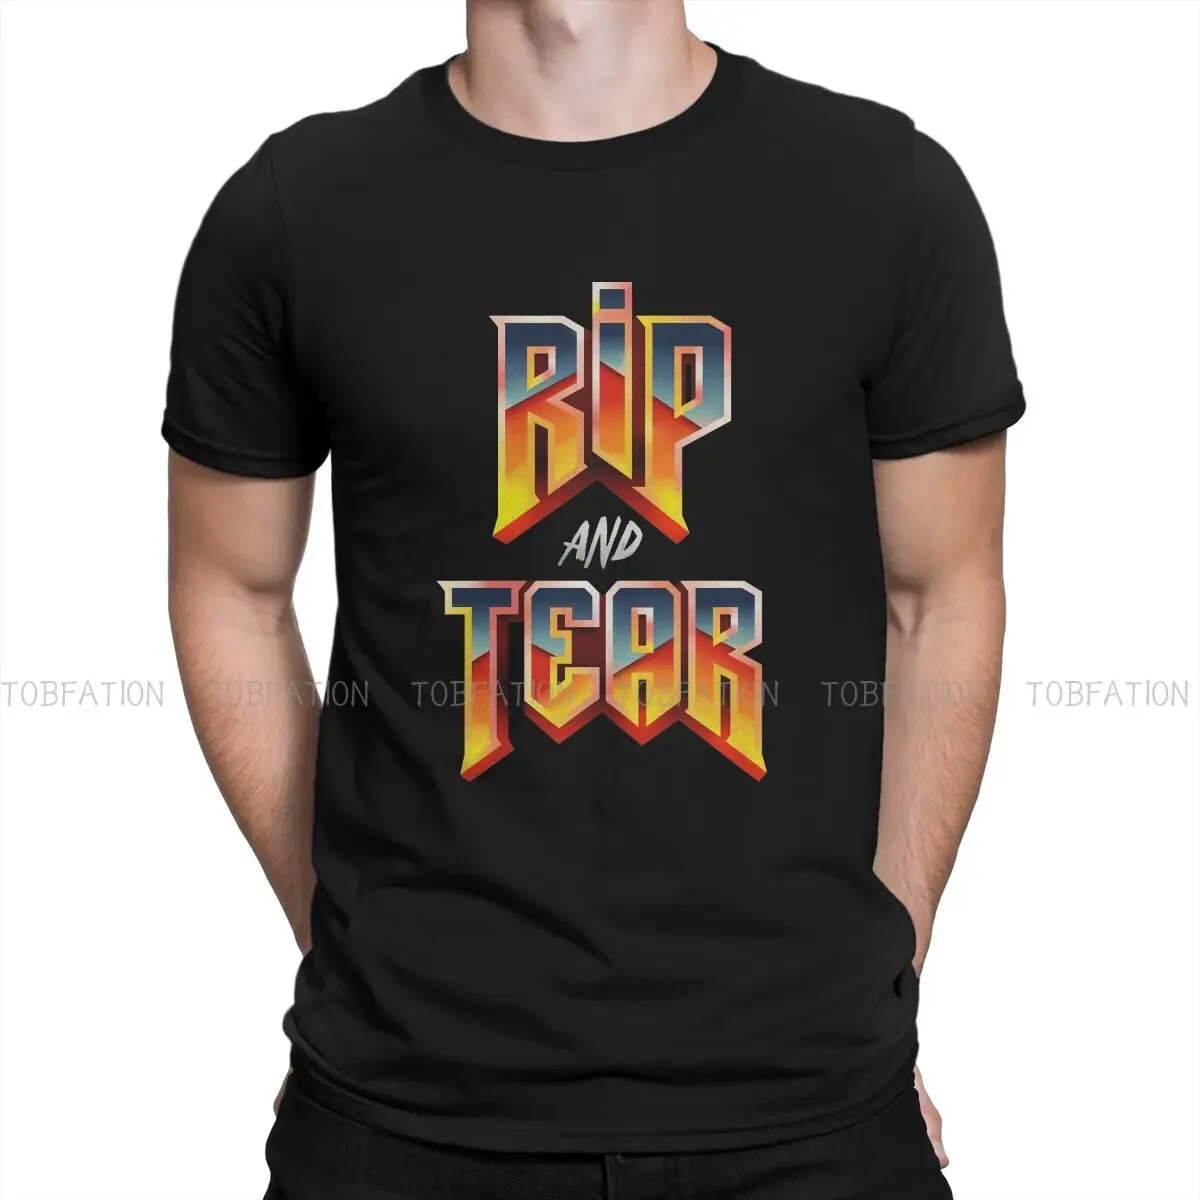 

Doom Slayer Game Rip and Tear Tshirt Classic Men Alternative Teenager Blouses Tops Oversized Cotton O-Neck T Shirt